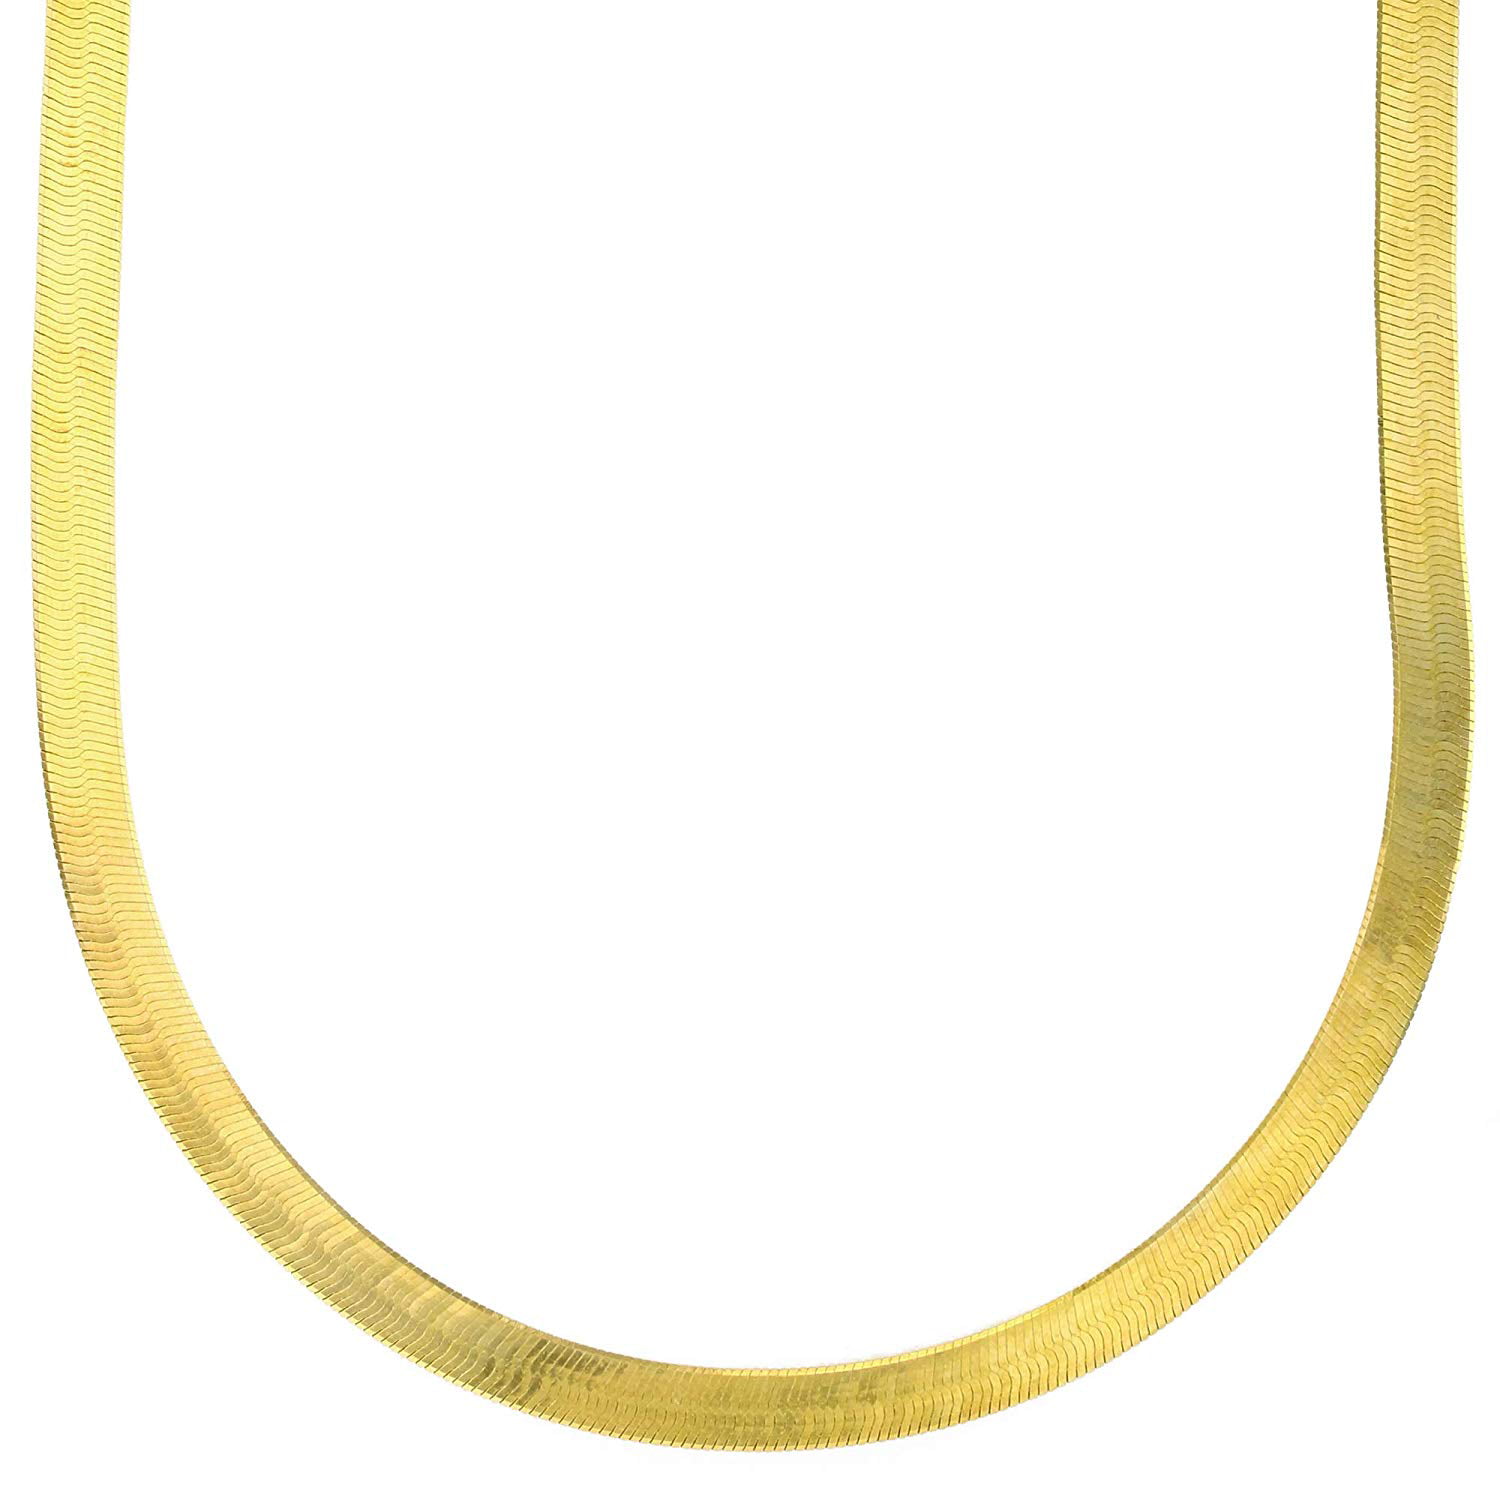 14k Solid Yellow Gold High Polish Herringbone Nacklace in 3mm&5mm Lobster Clasp